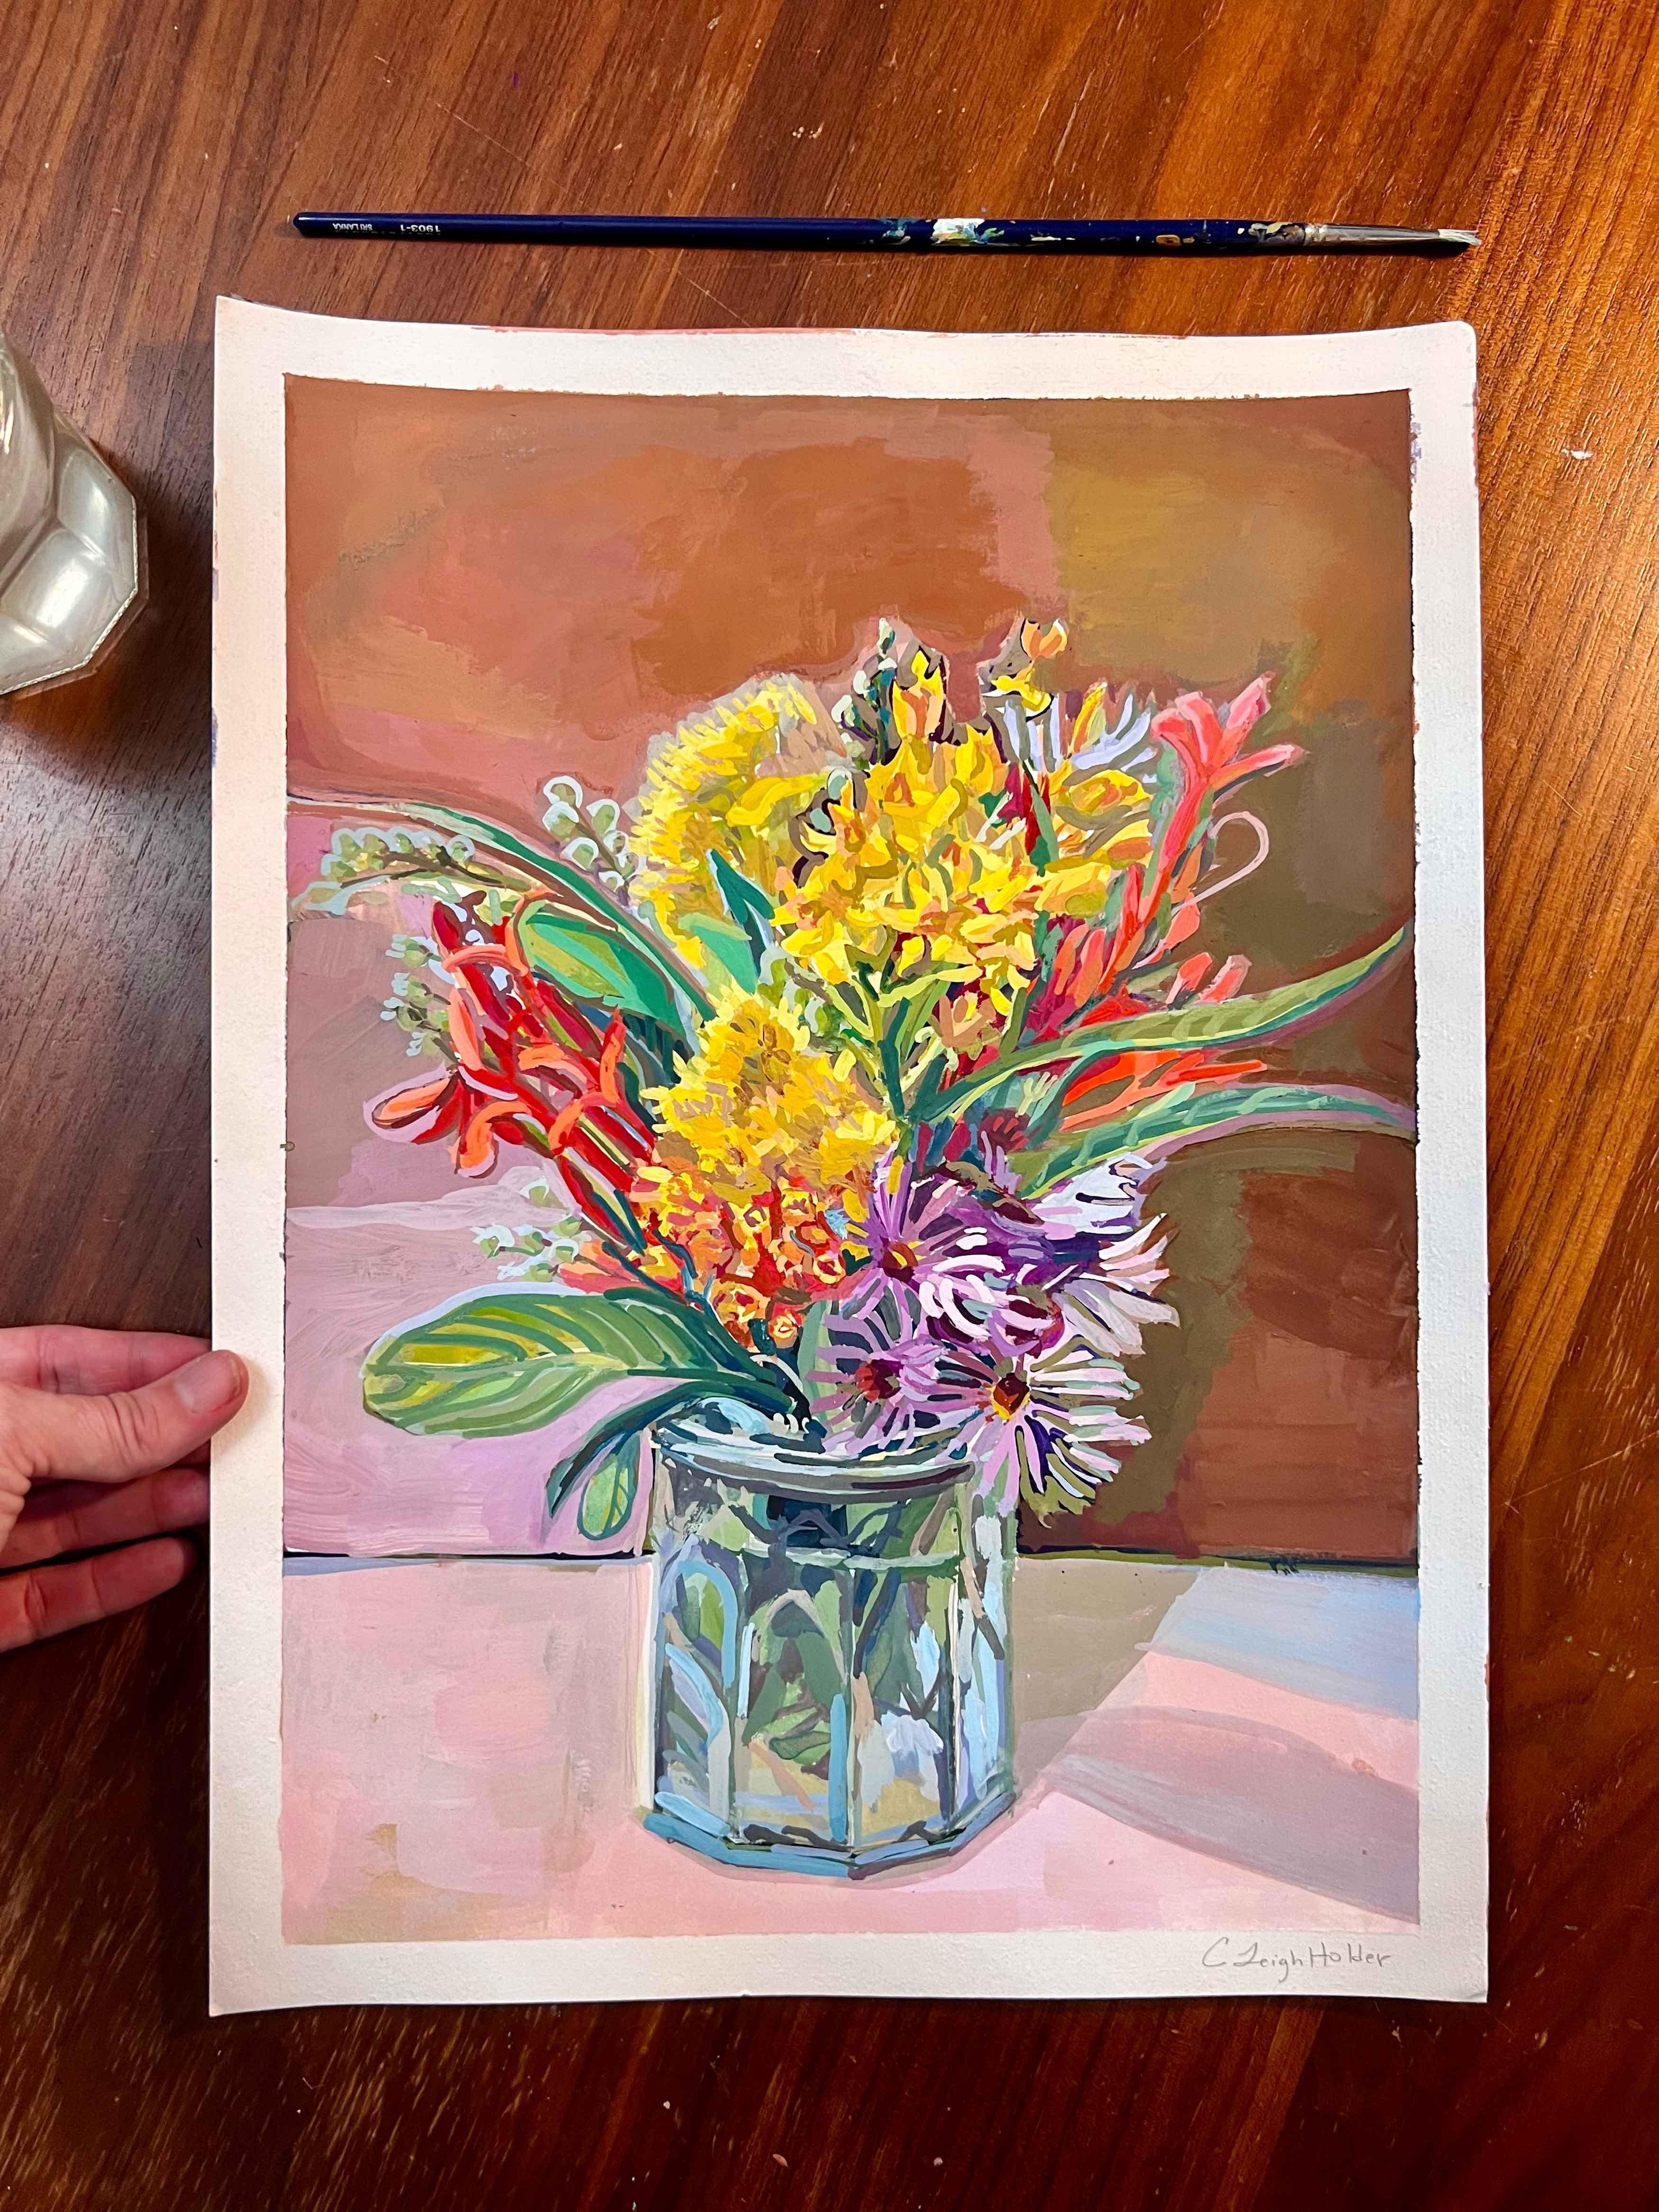 Wildflowers Painting, Original Gouache Painting, Vintage-Style, Still-Life Painting from Austin Texas Nostalgia Art Series